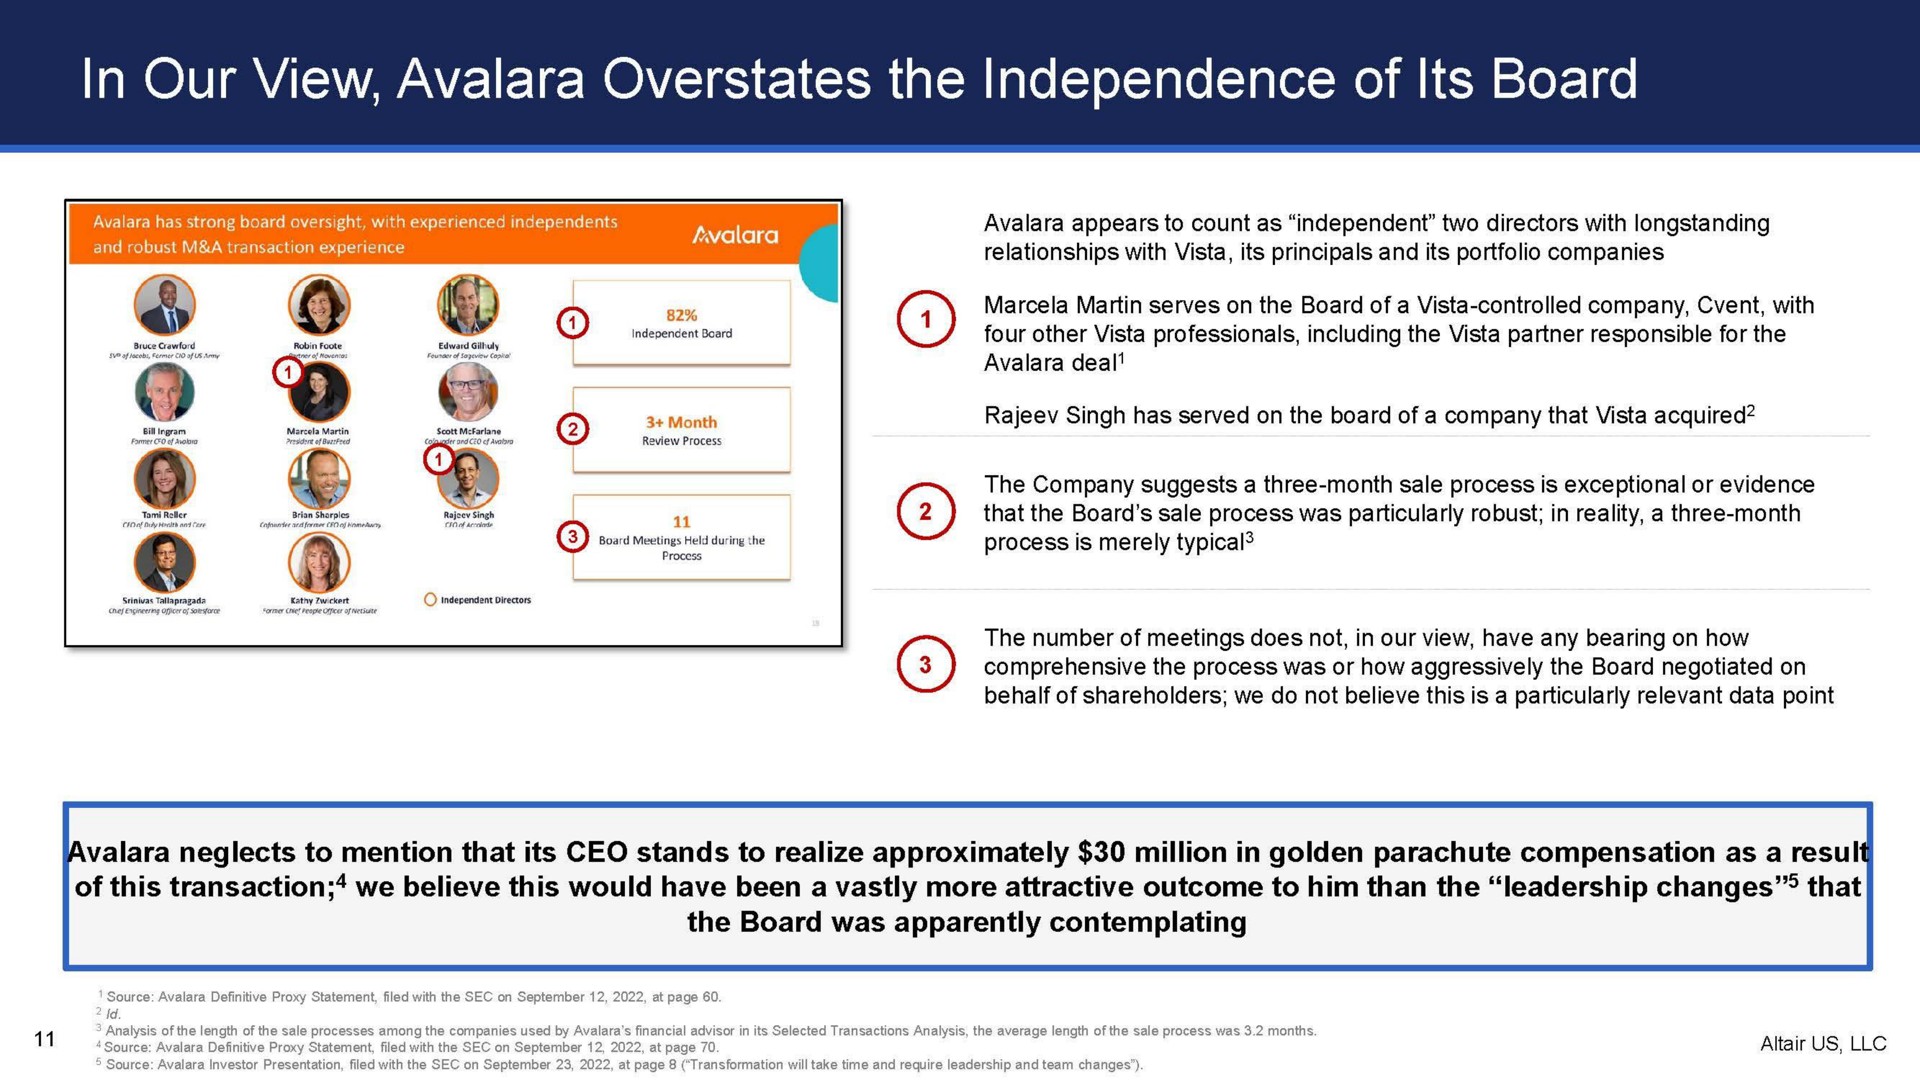 in our view overstates the independence of its board | Altair US LLC